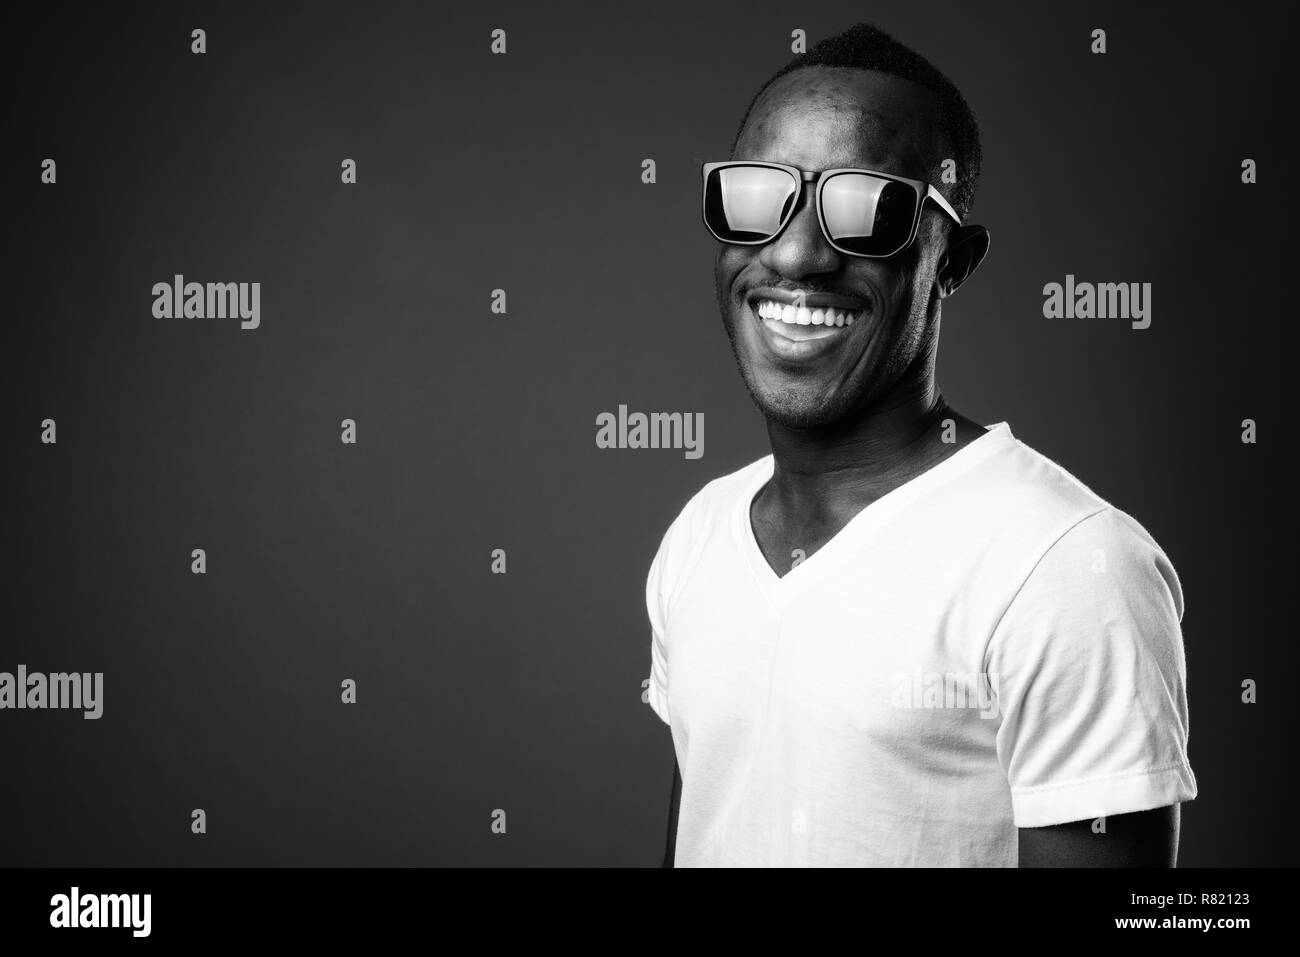 Young African man wearing sunglasses and smiling Stock Photo